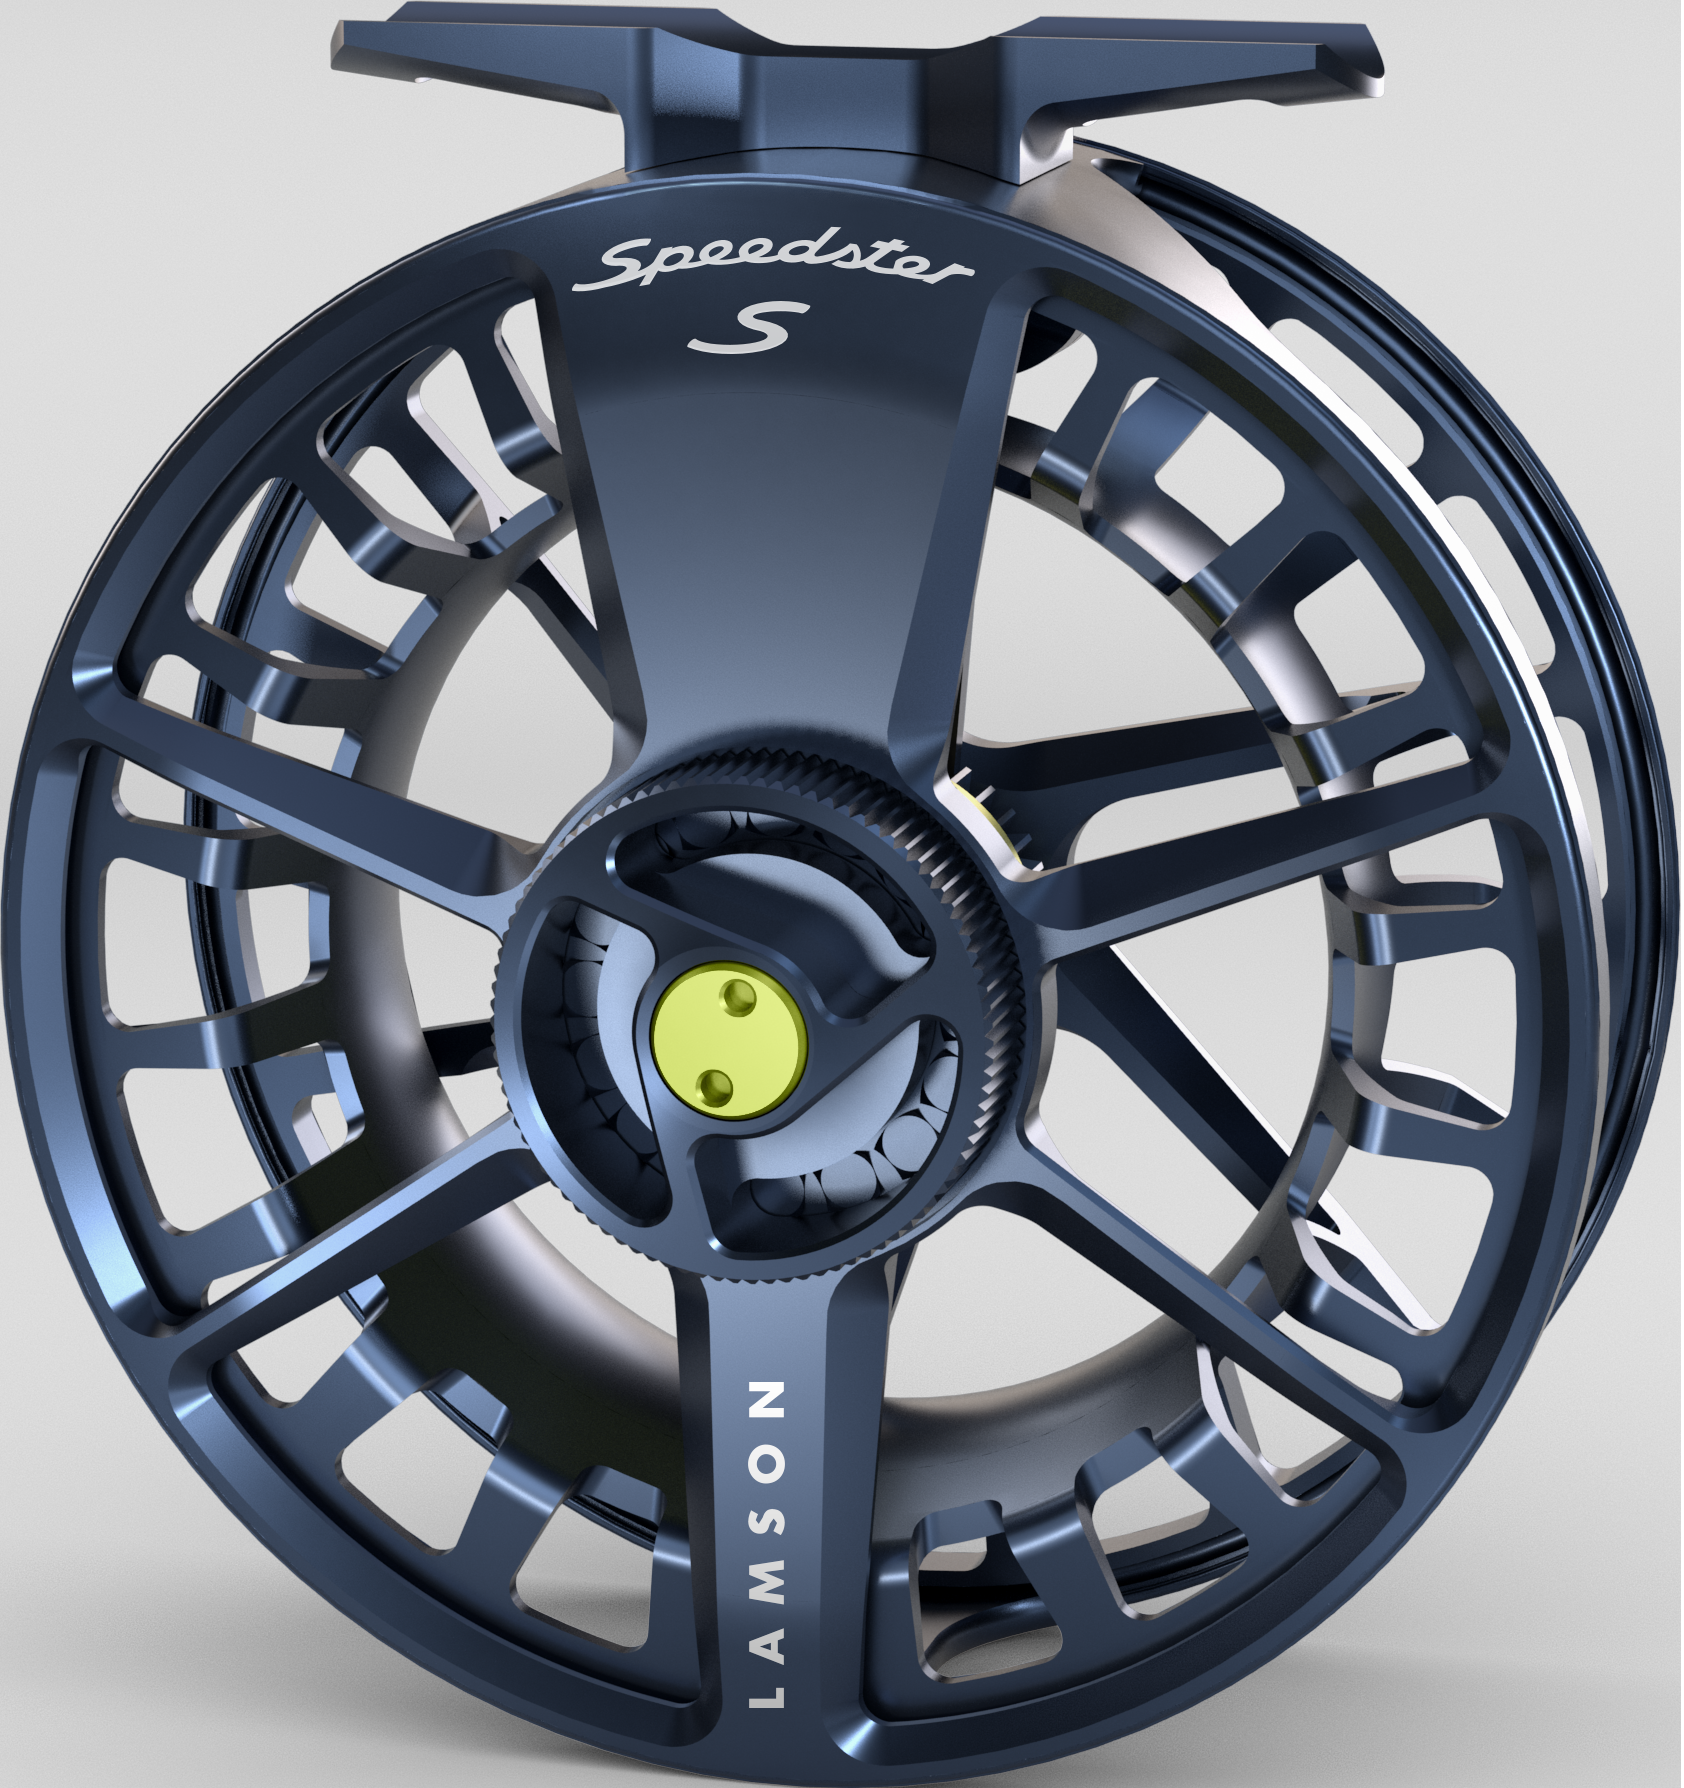 Speedster S Fly Fishing Reel Size -7+ Midnight - Andy Thornal Company